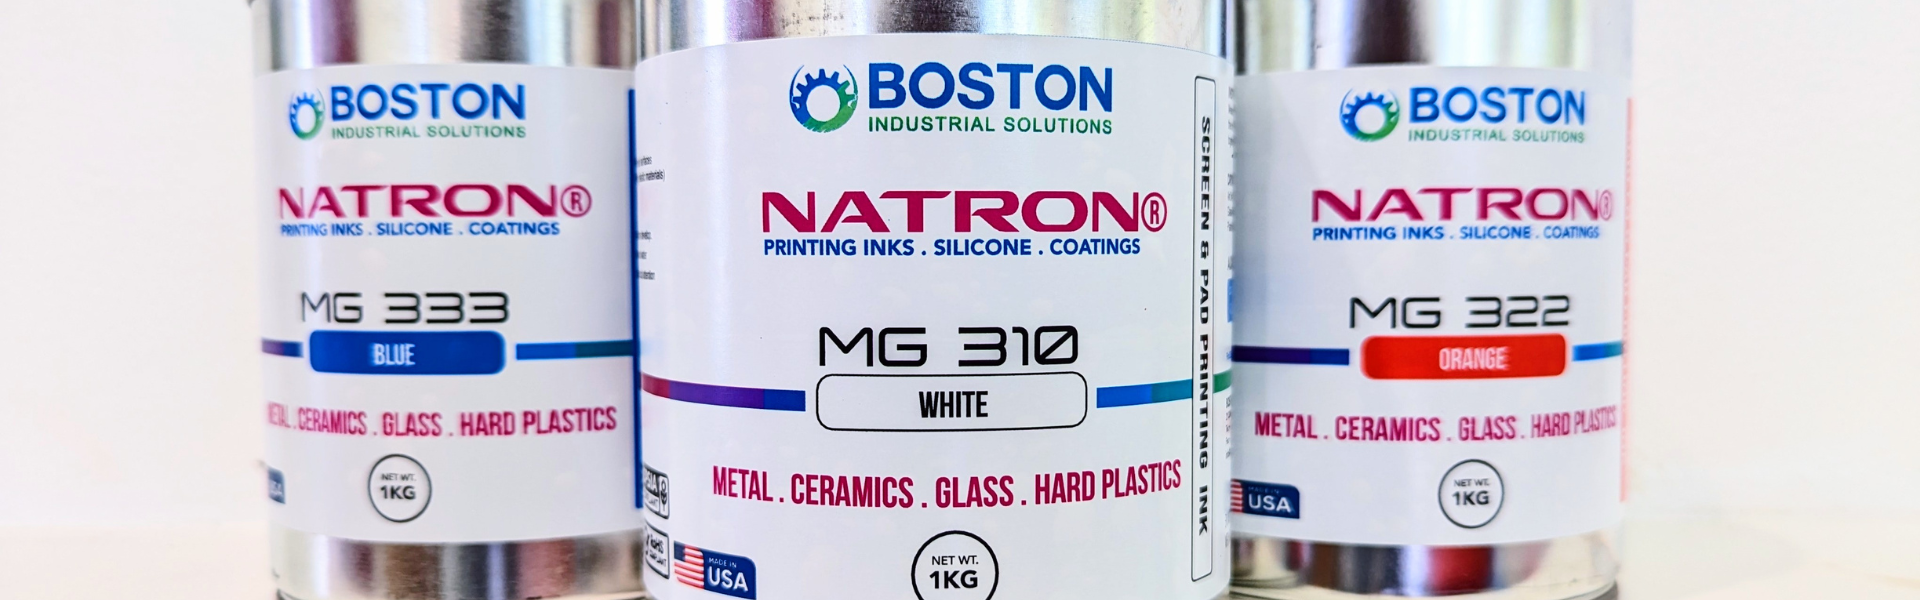 glass printing inks -Natron inks from Boston Industrial Solutions